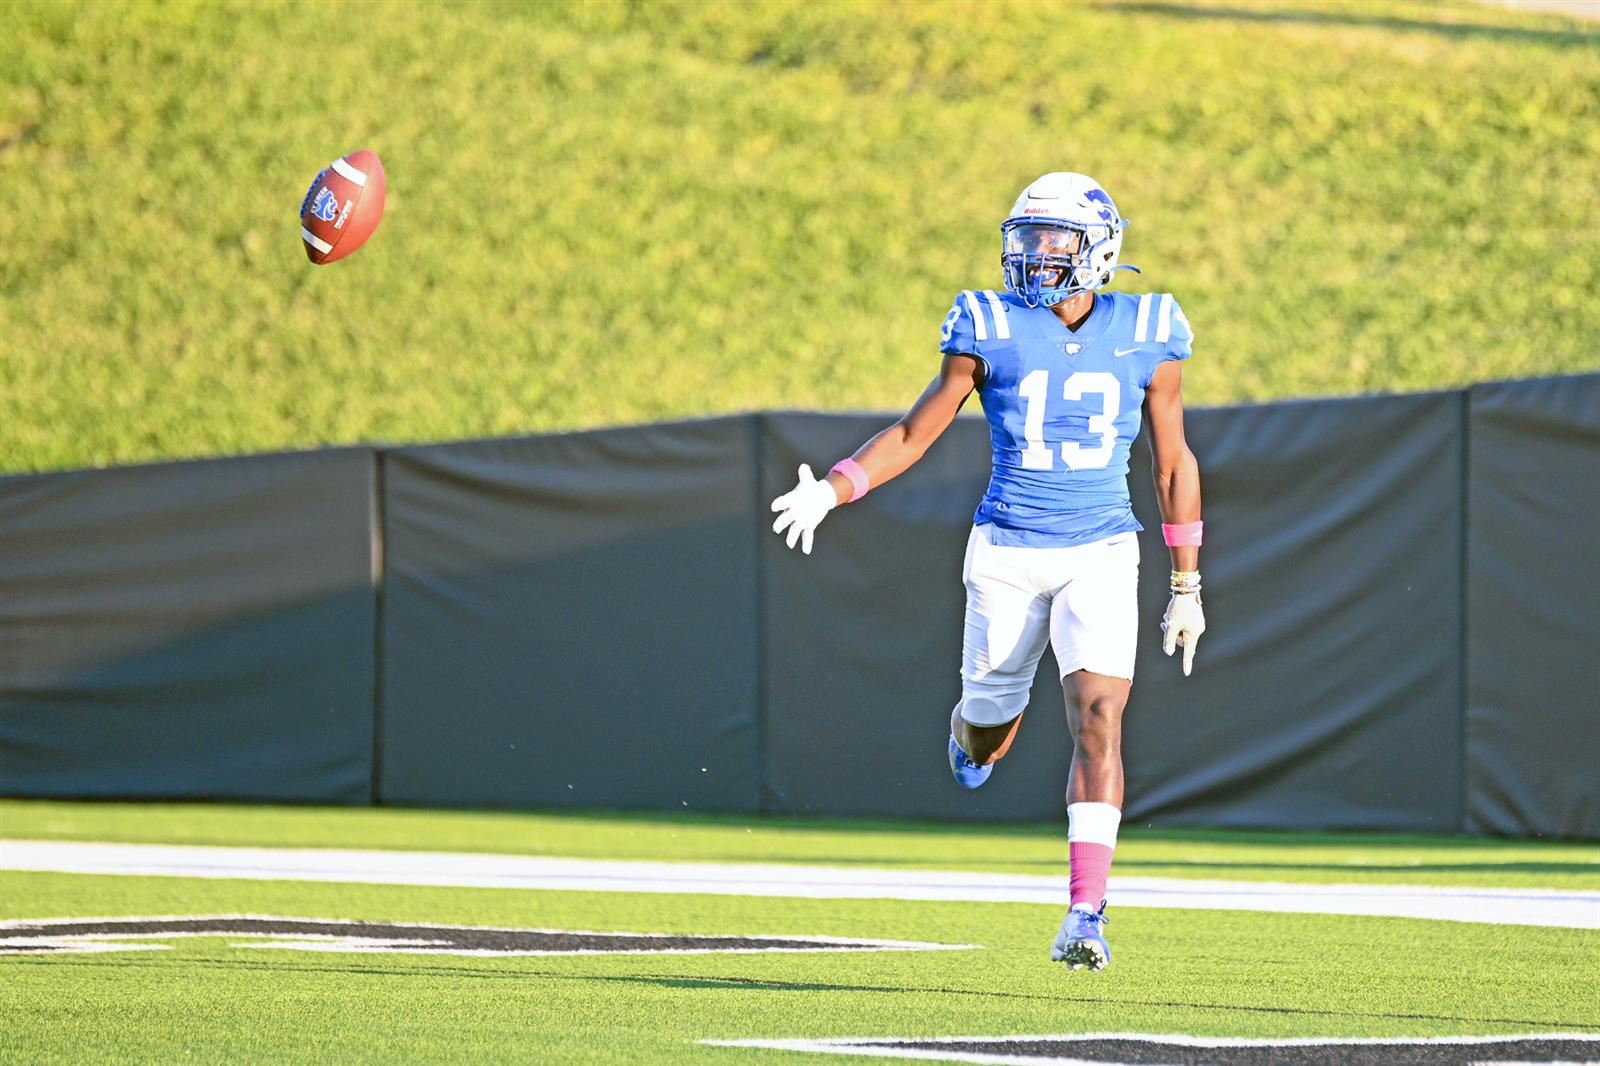 Cypress Creek High School sophomore wide receiver Rashod Richardson was named to the All-District 17-6A first team.